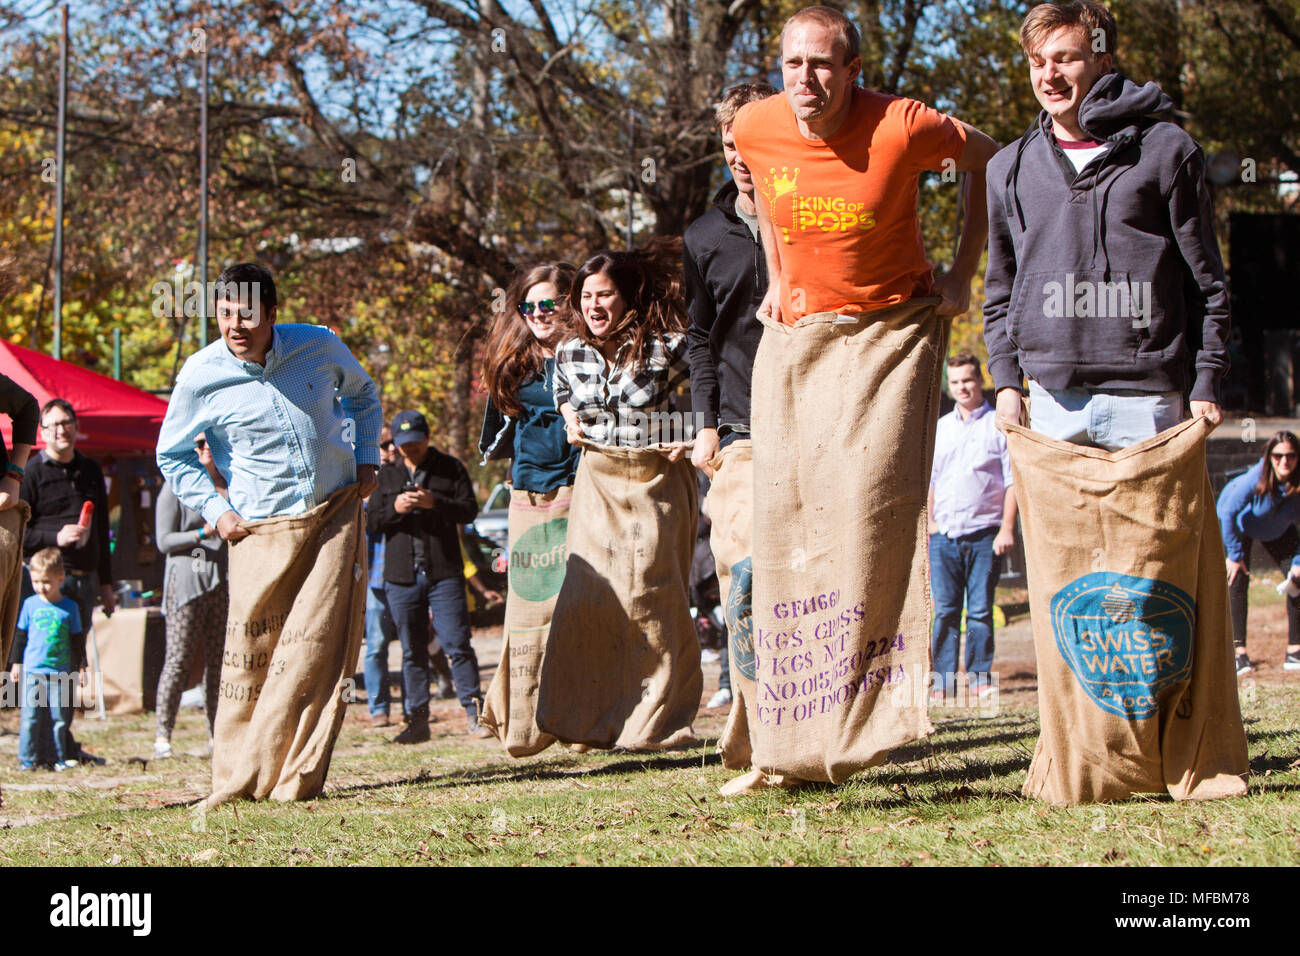 Young adults compete in a sack race at the King of Pops Festival in Atlanta, GA on November 14, 2015. Stock Photo